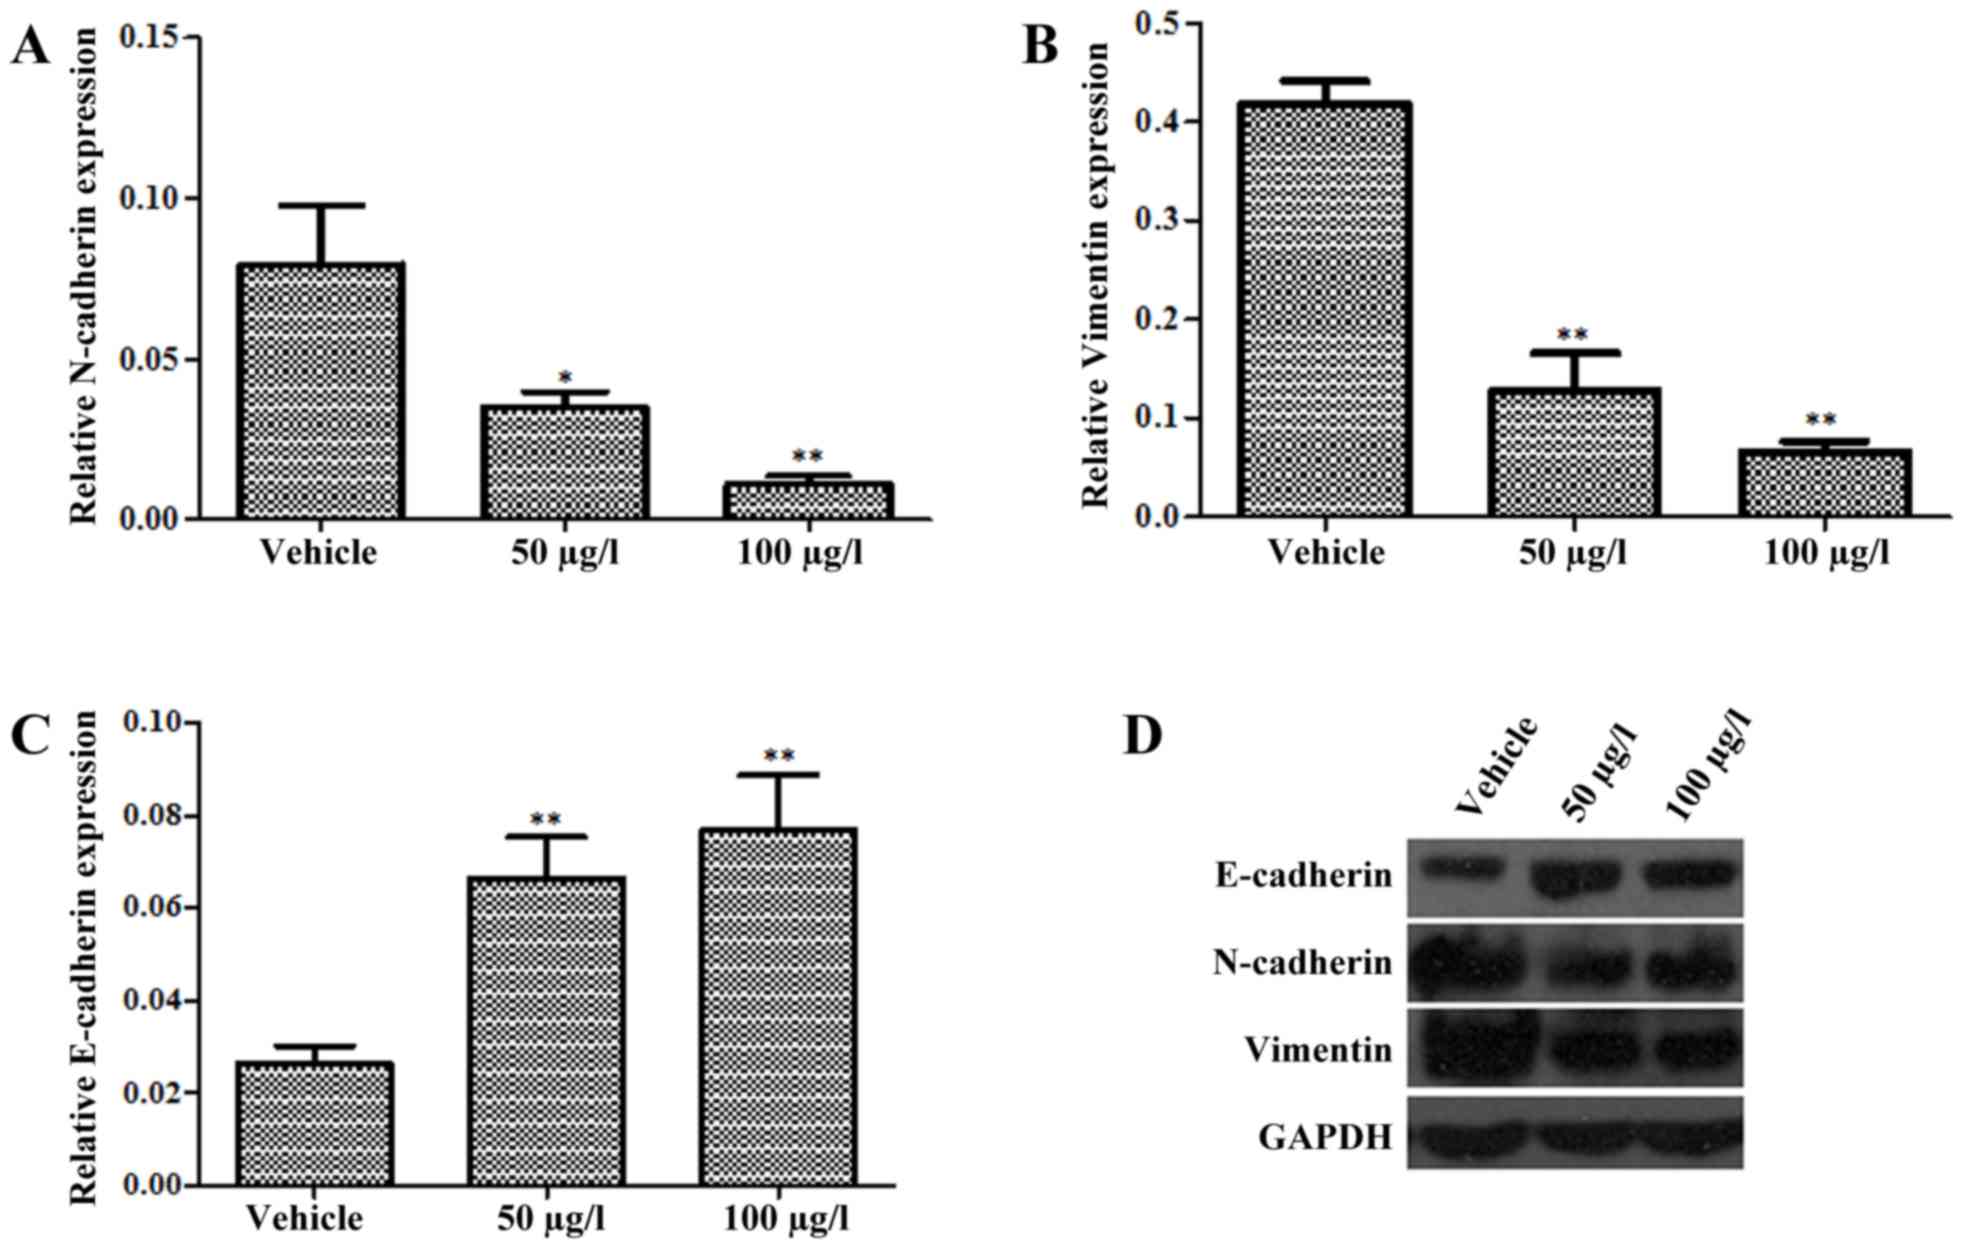 Oldhamianoside Ii Inhibits Prostate Cancer Progression Via Regulation Of Emt And The Wnt B Catenin Signaling Pathway